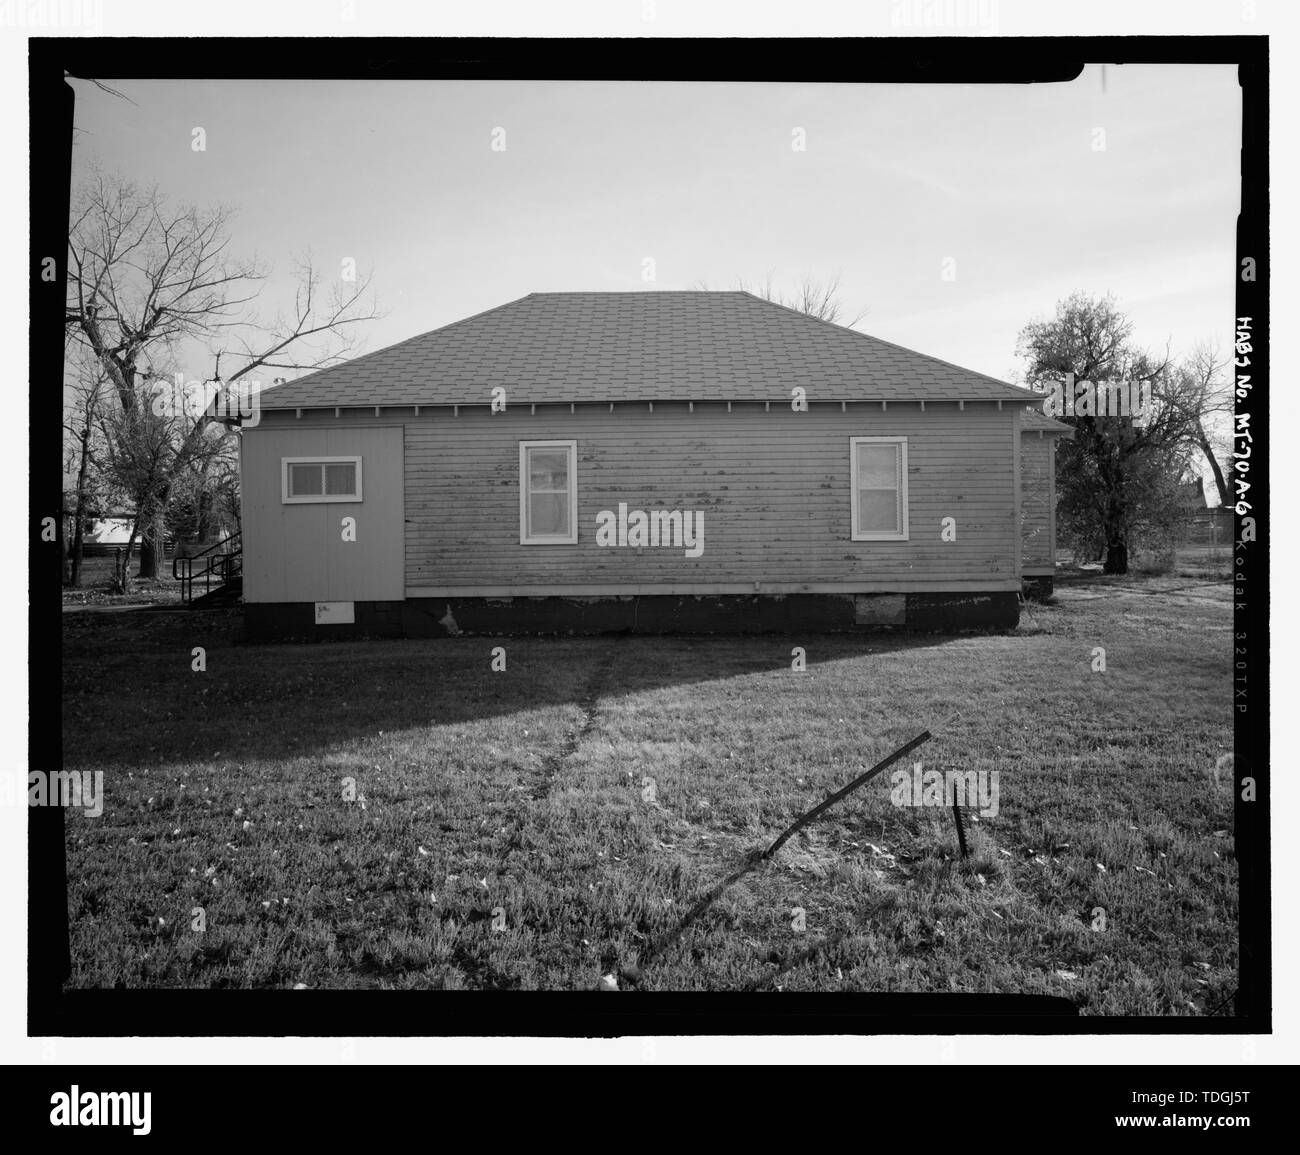 North side, view to south - Fort Peck Indian Boarding School, Employee's Quarters, Northwest corner of Assiniboine Avenue and H Street, Poplar, Roosevelt County, MT Stock Photo